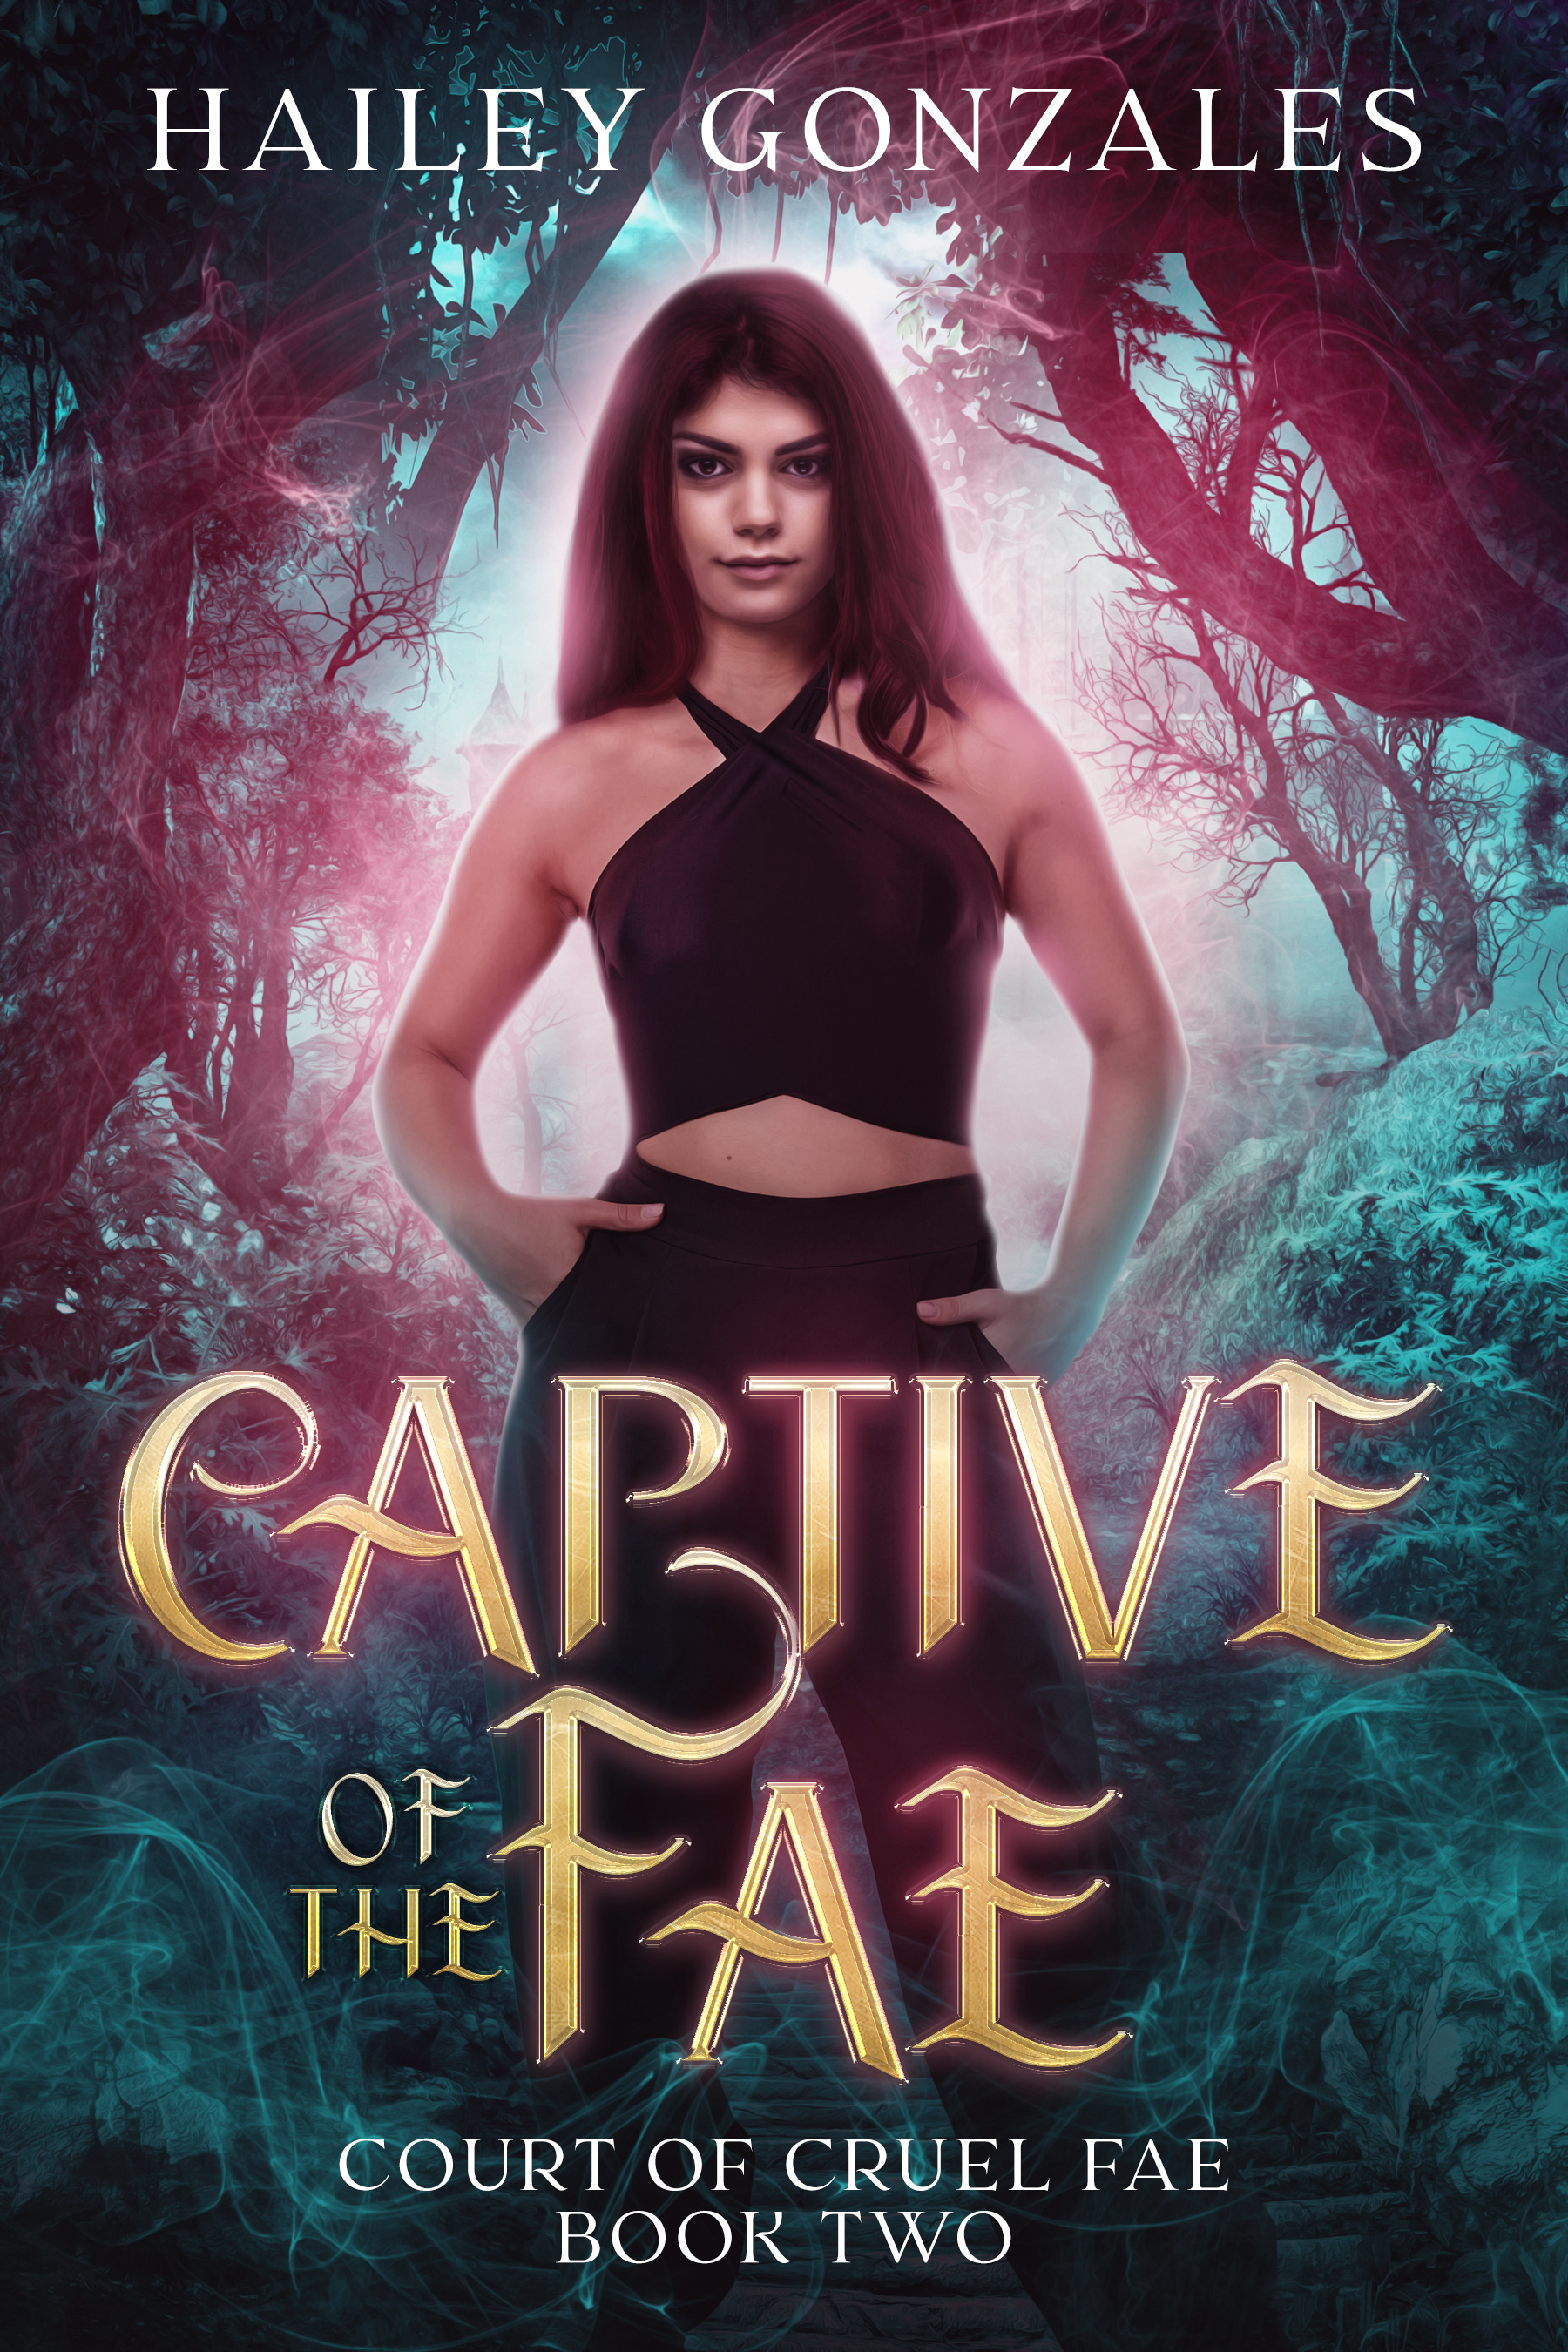 captive-of-the-fae-court-of-cruel-fae-book-two